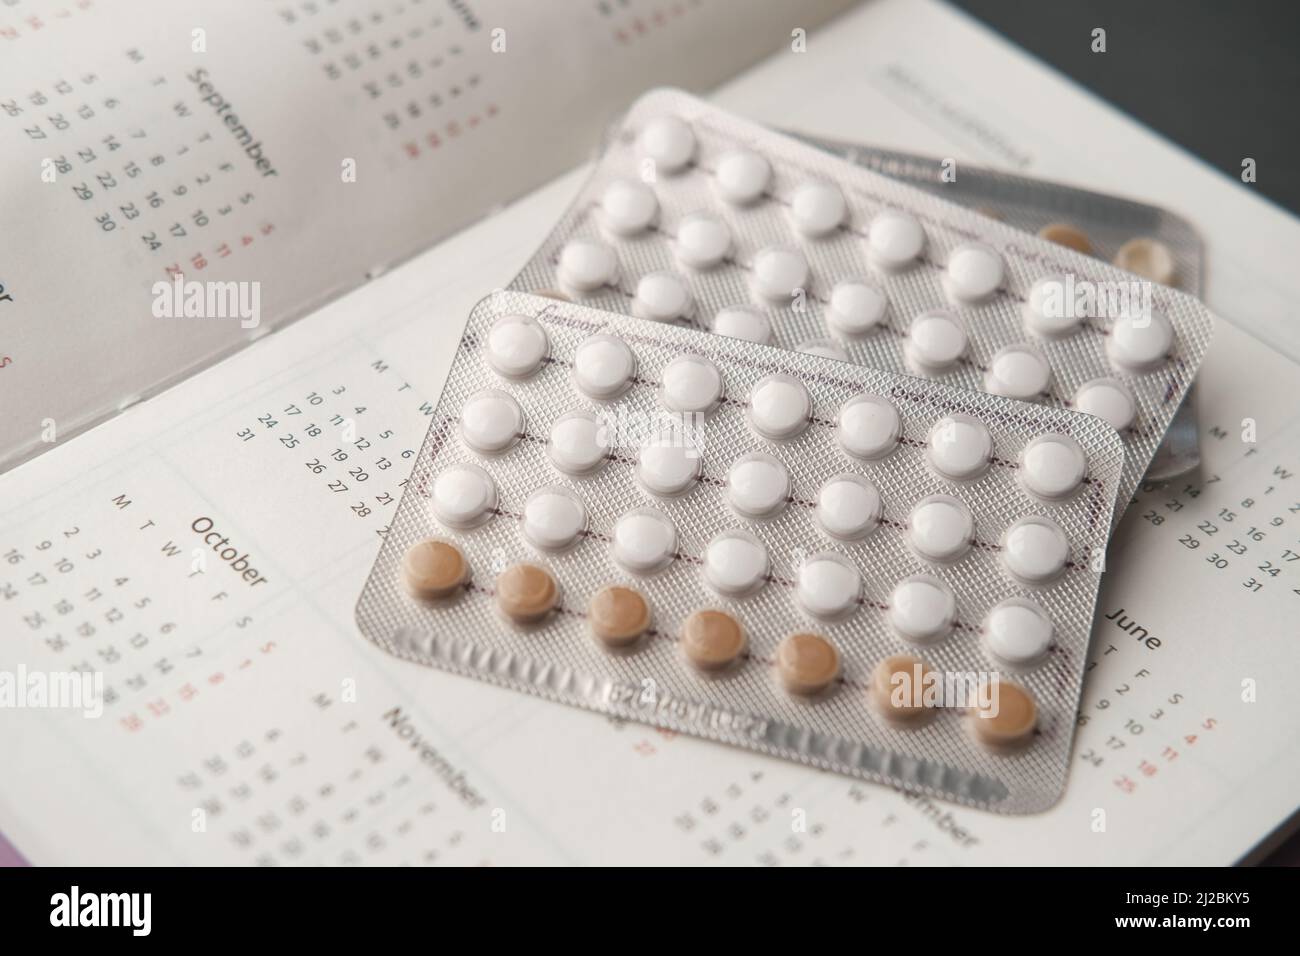 birth control pills , calendar and notepad on table  Stock Photo